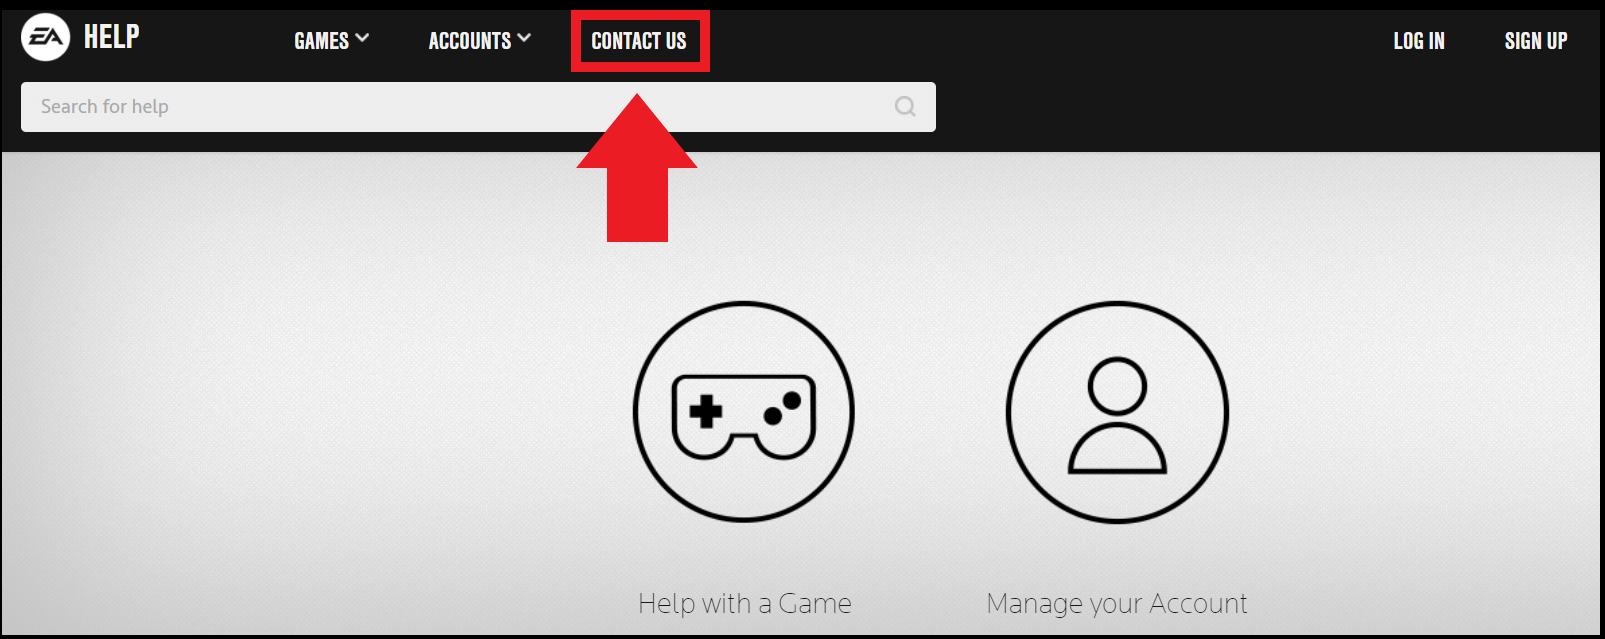 Contact EA Support via the contact button on the EA help page.